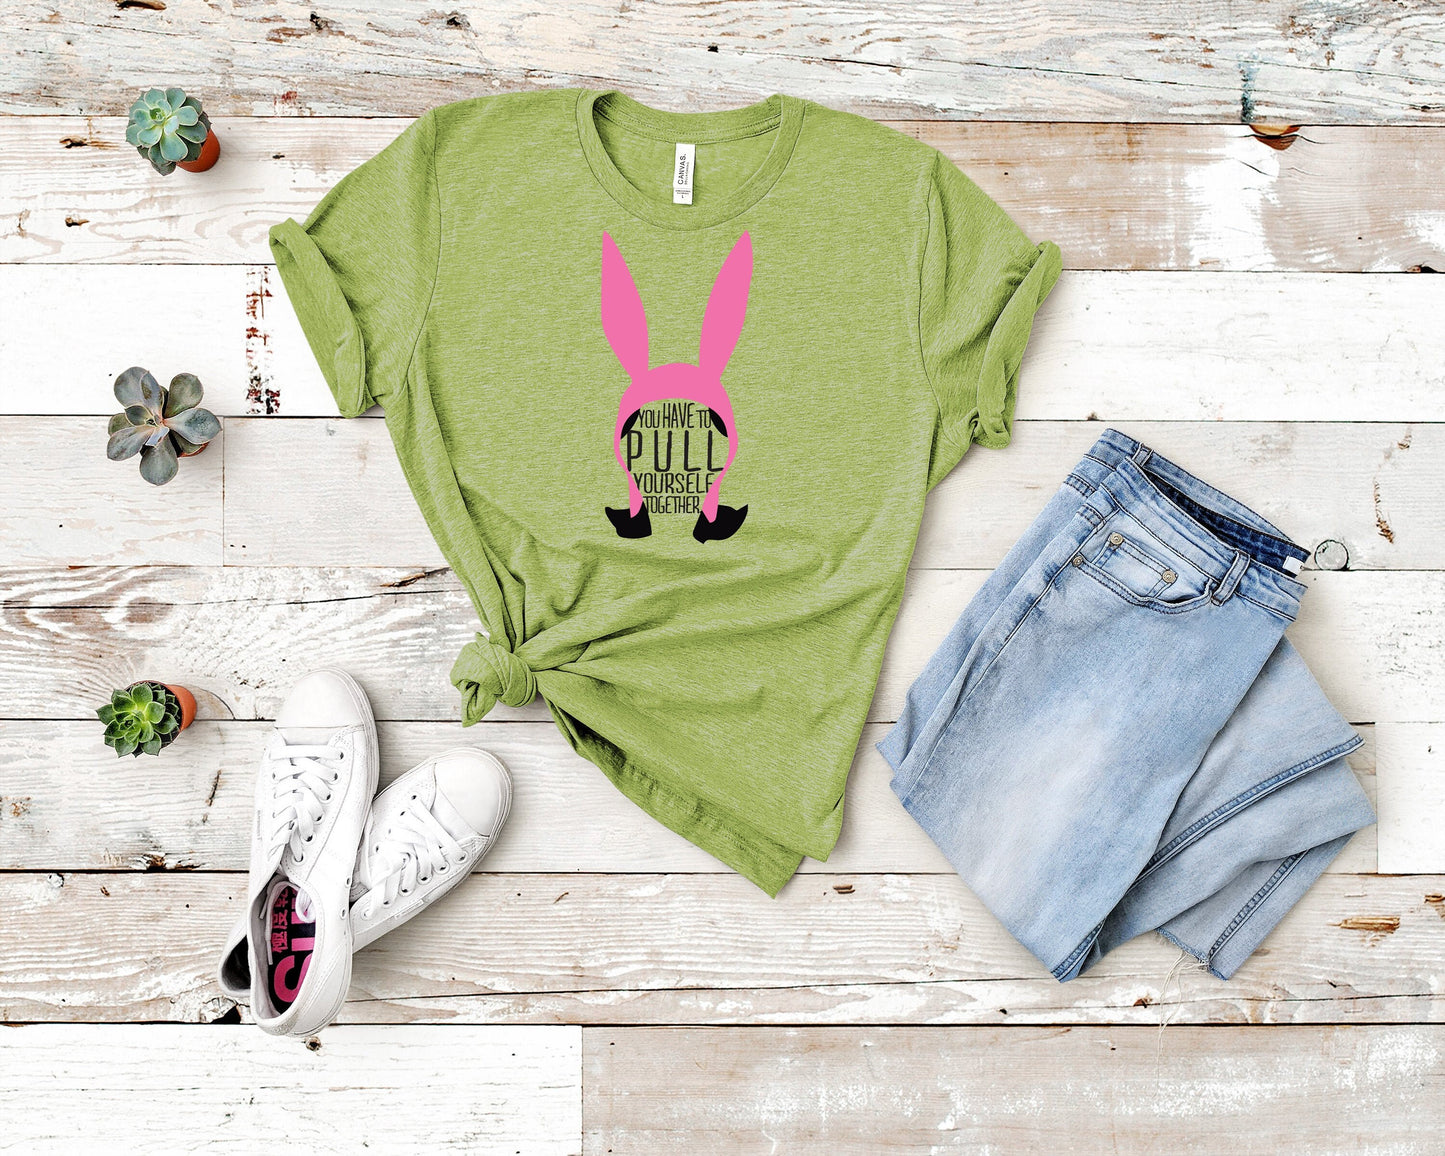 Louise Belcher - Bobs Burgers Fan - You Have To Pull Yourself Together! - Unisex Adults - Funny Gift